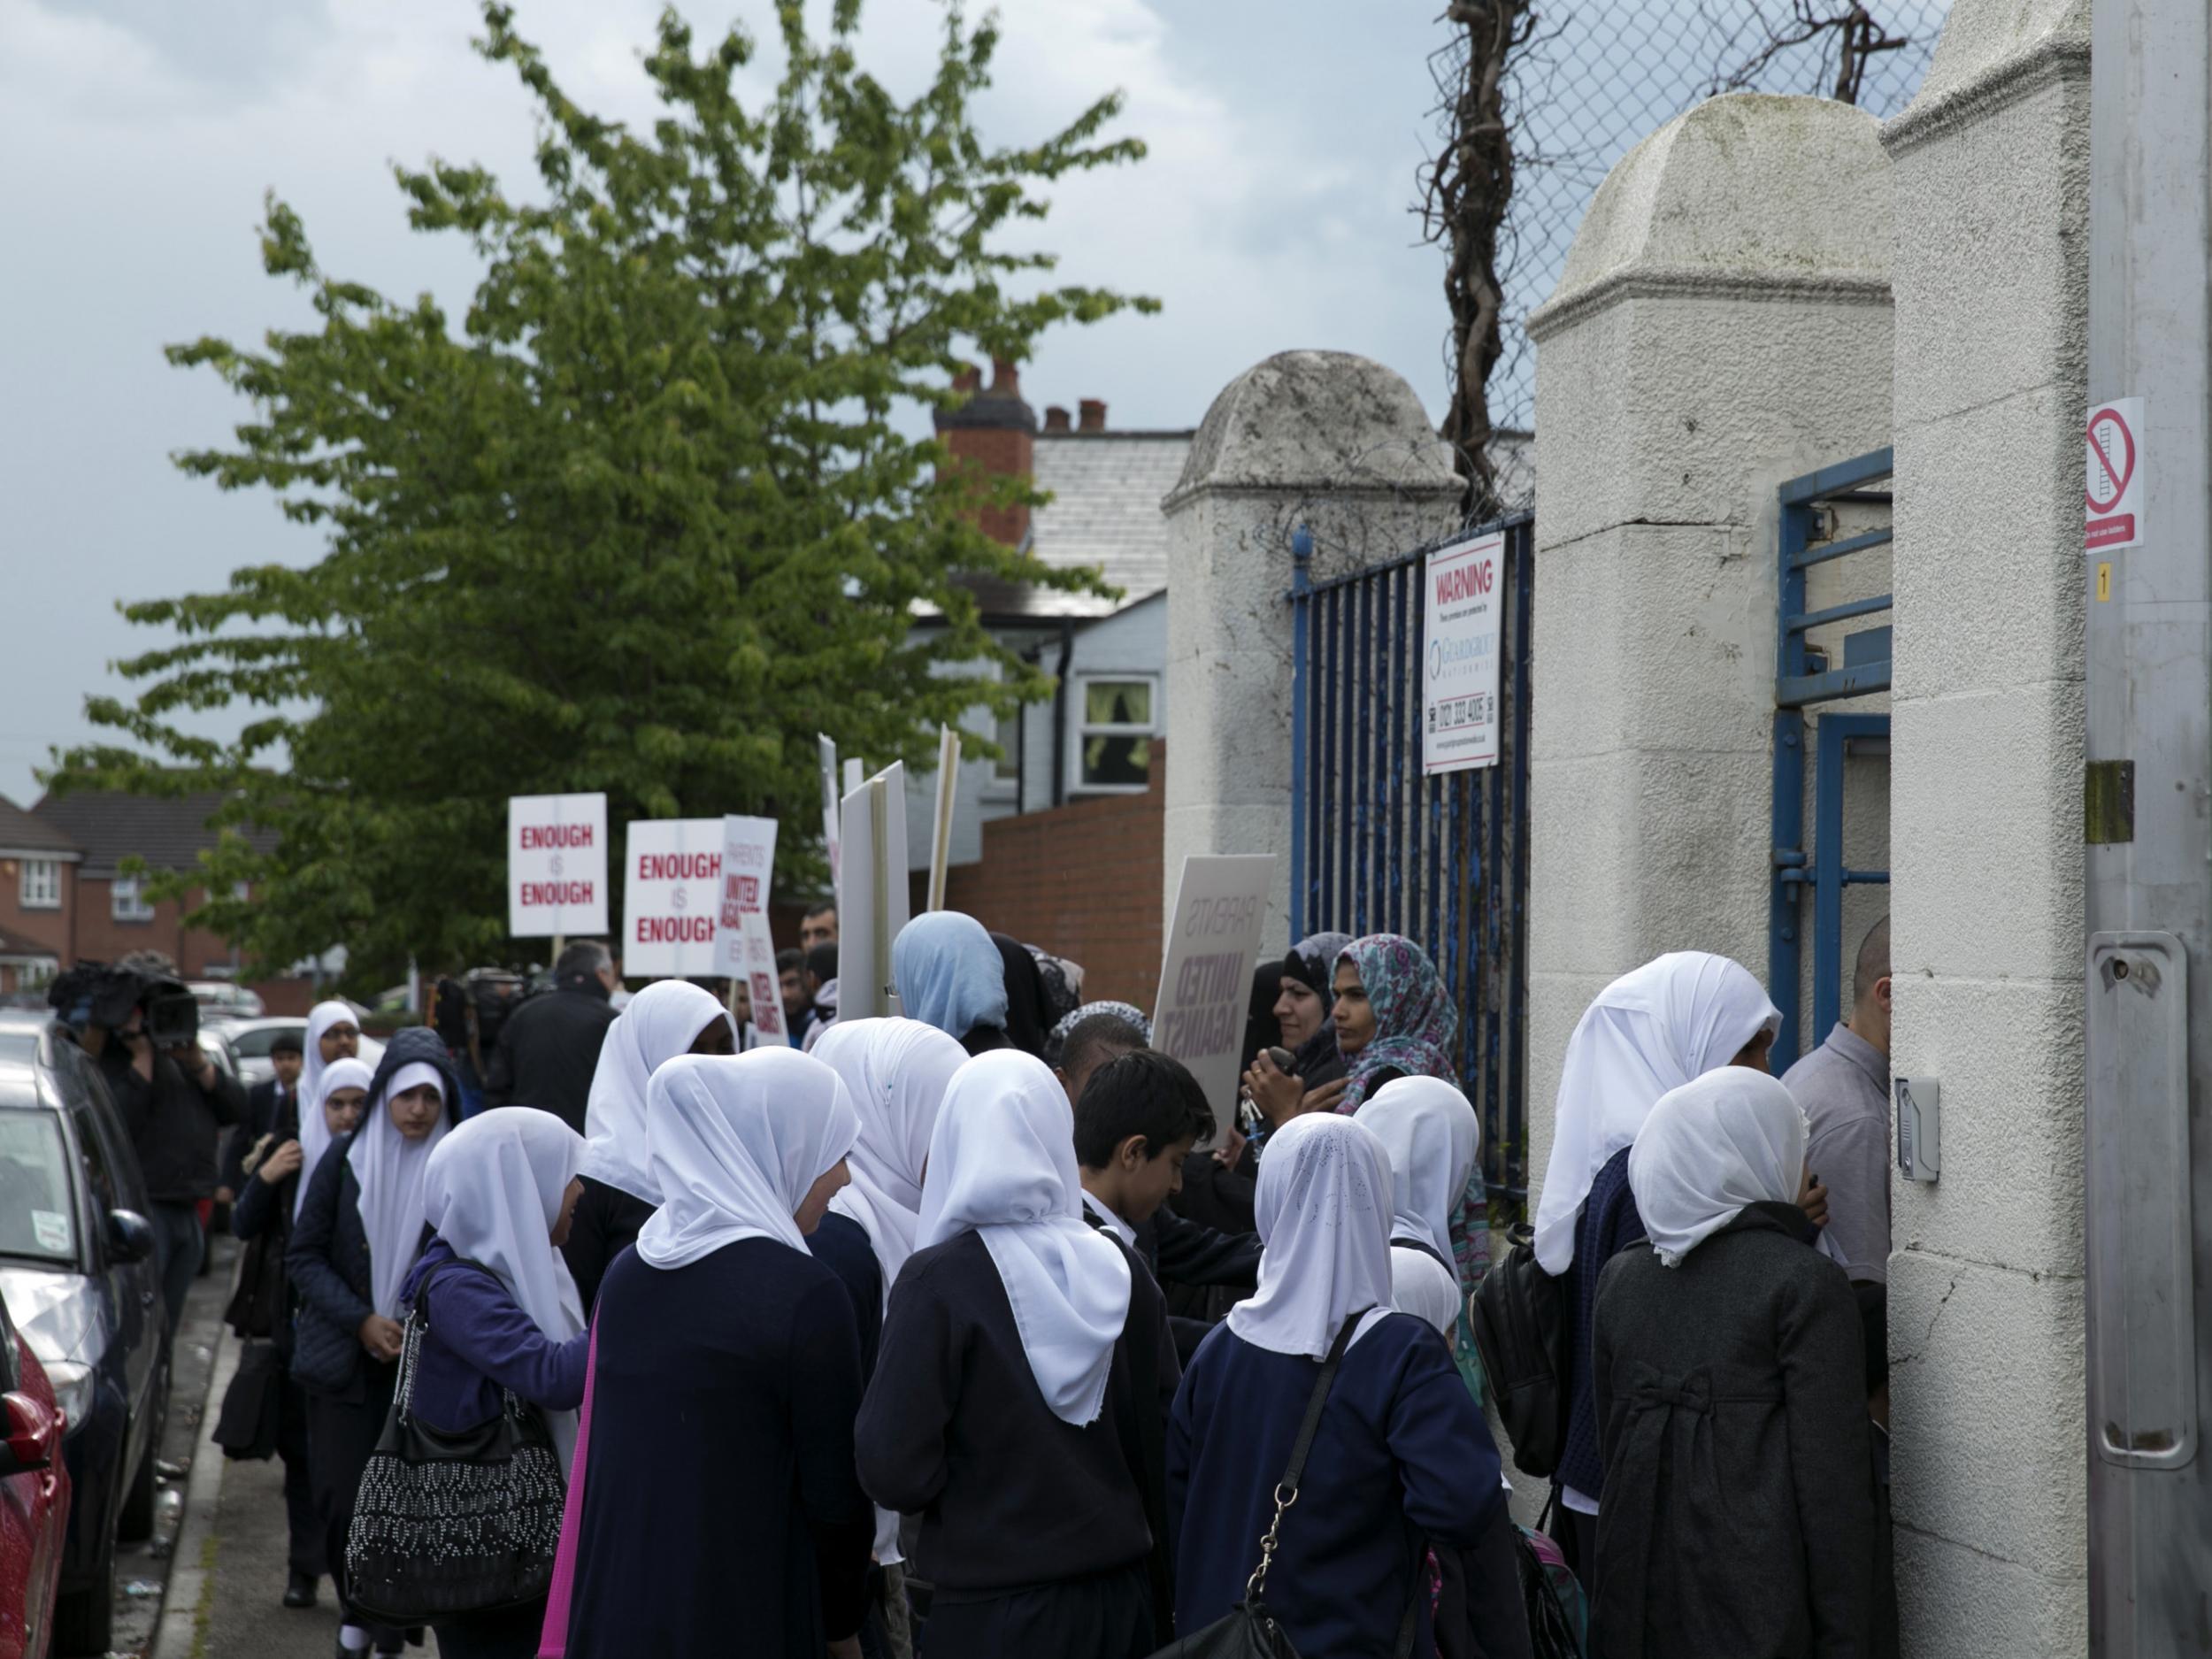 The Al-Hijrah School is also currently embroiled in a long legal battle to allow it to segregate girls and boys